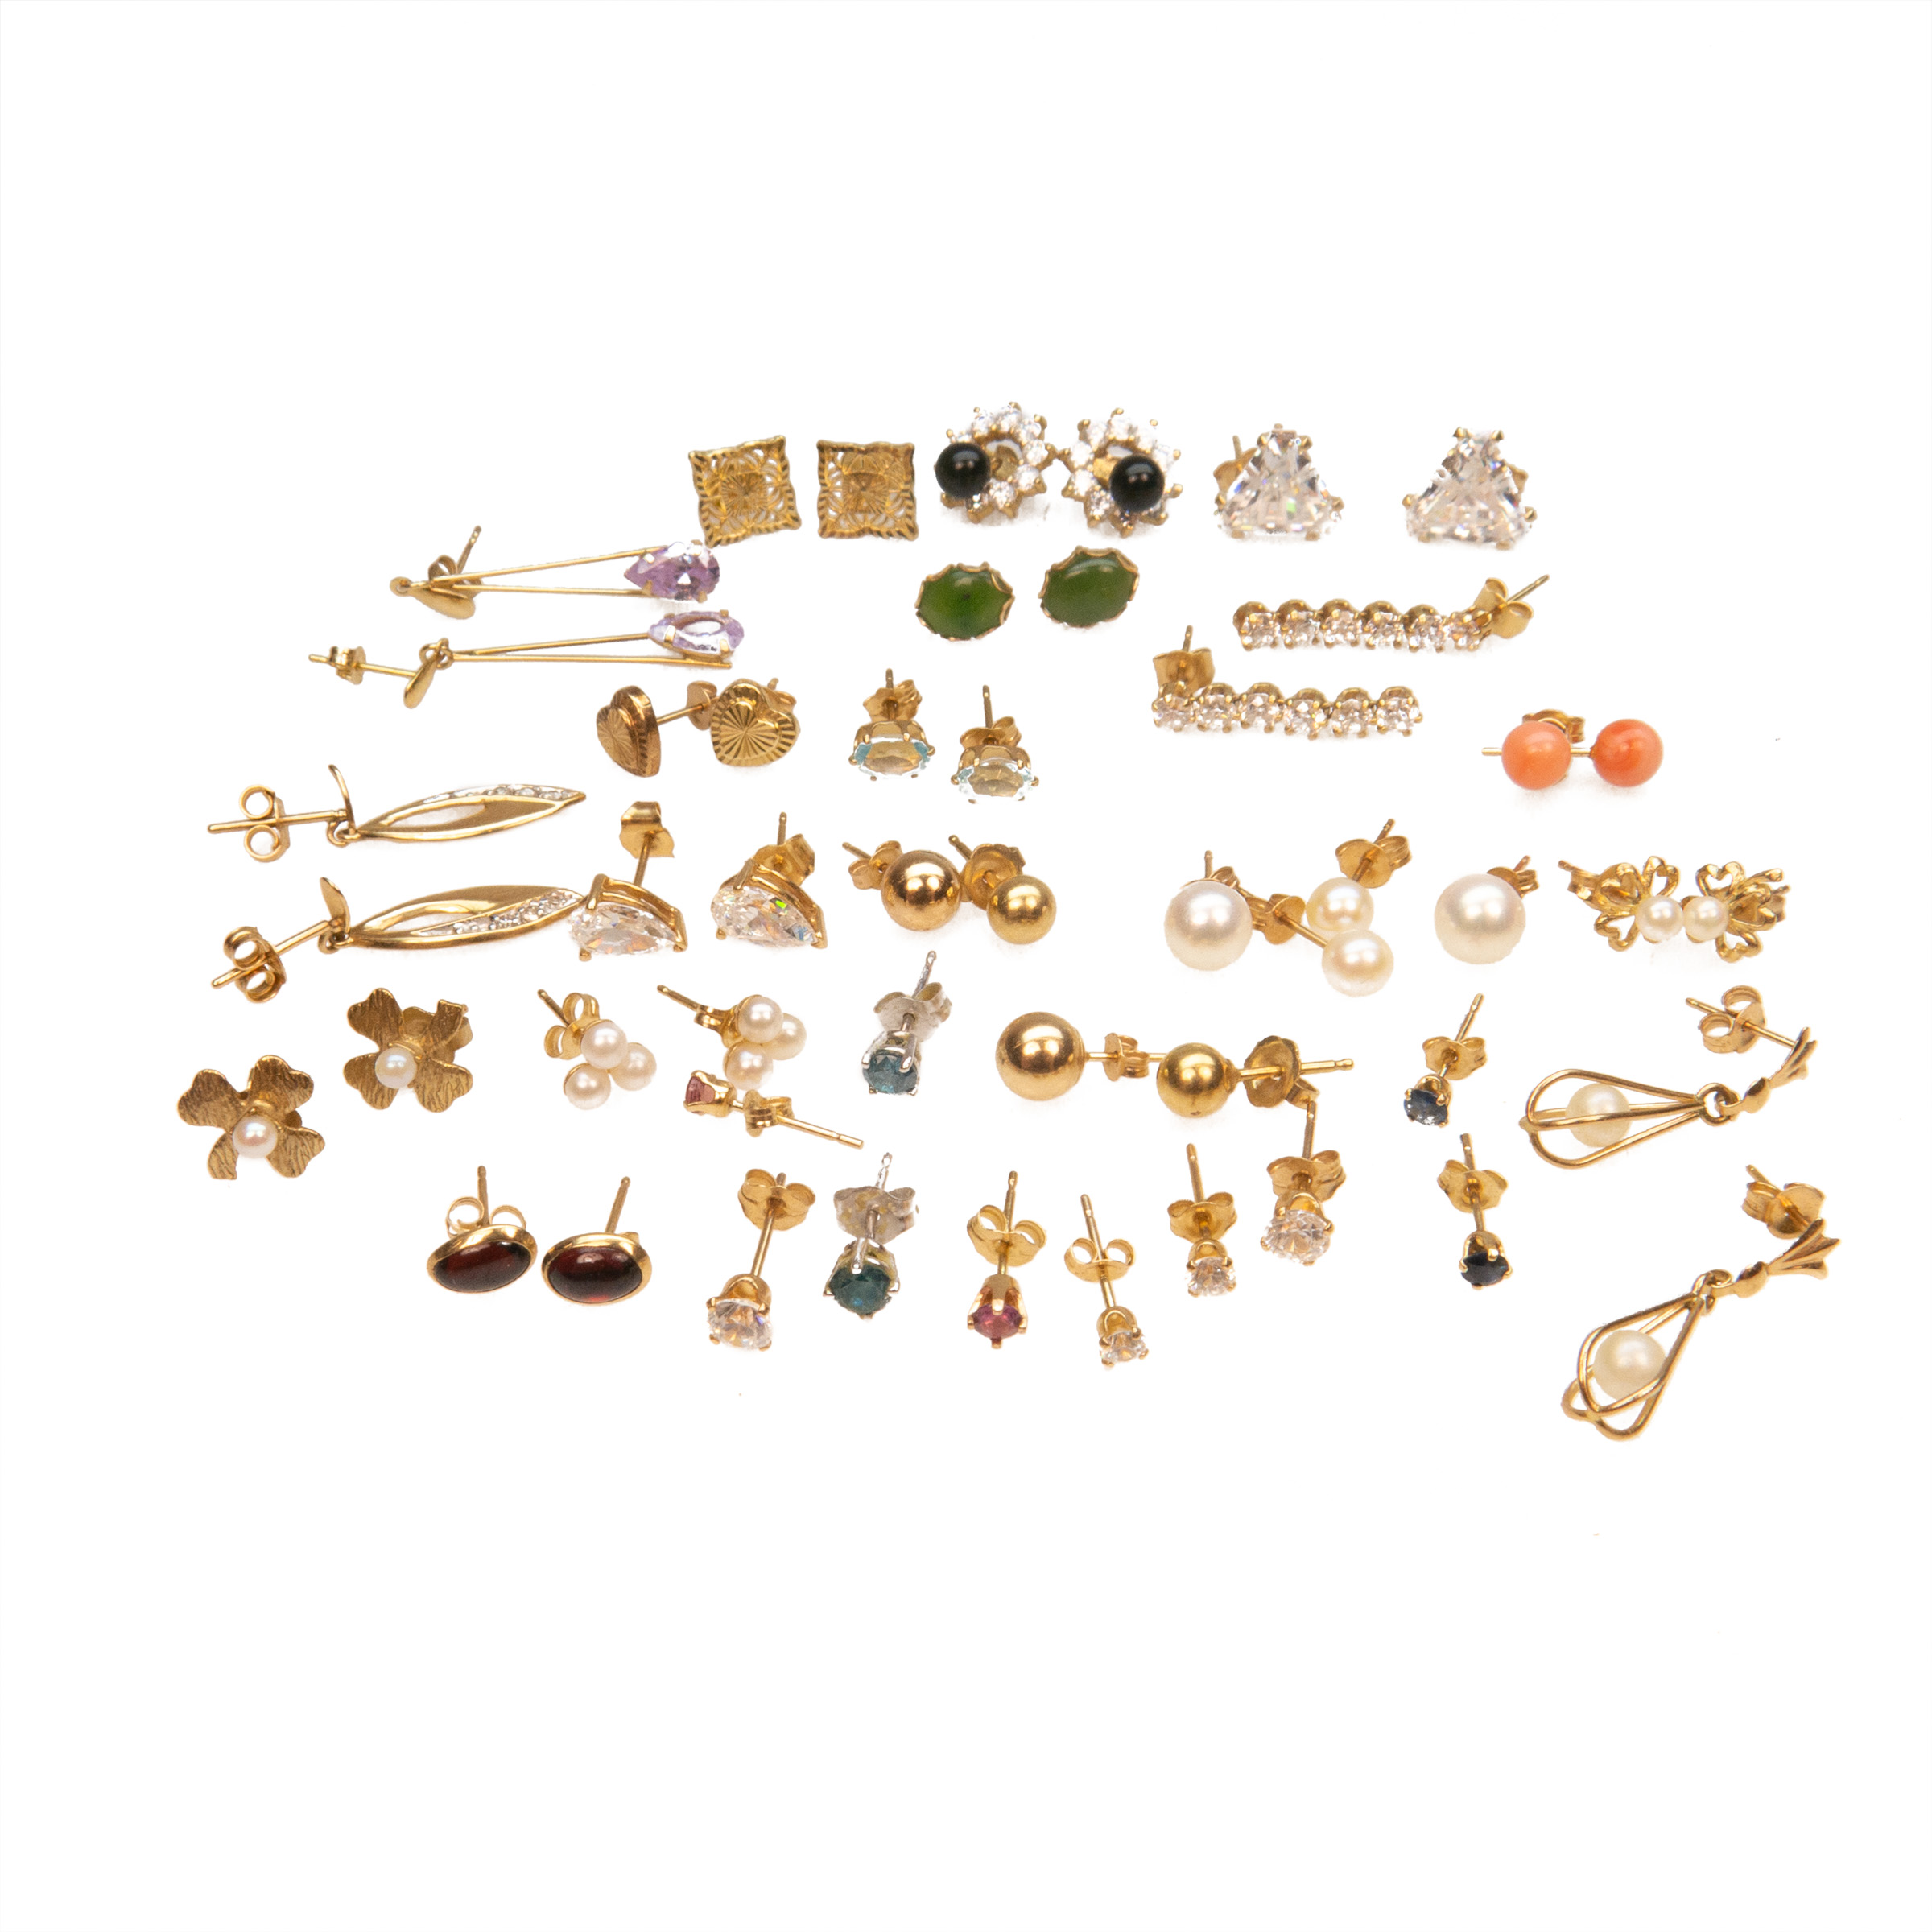 25 Pairs Of 14K Yellow Gold Earrings